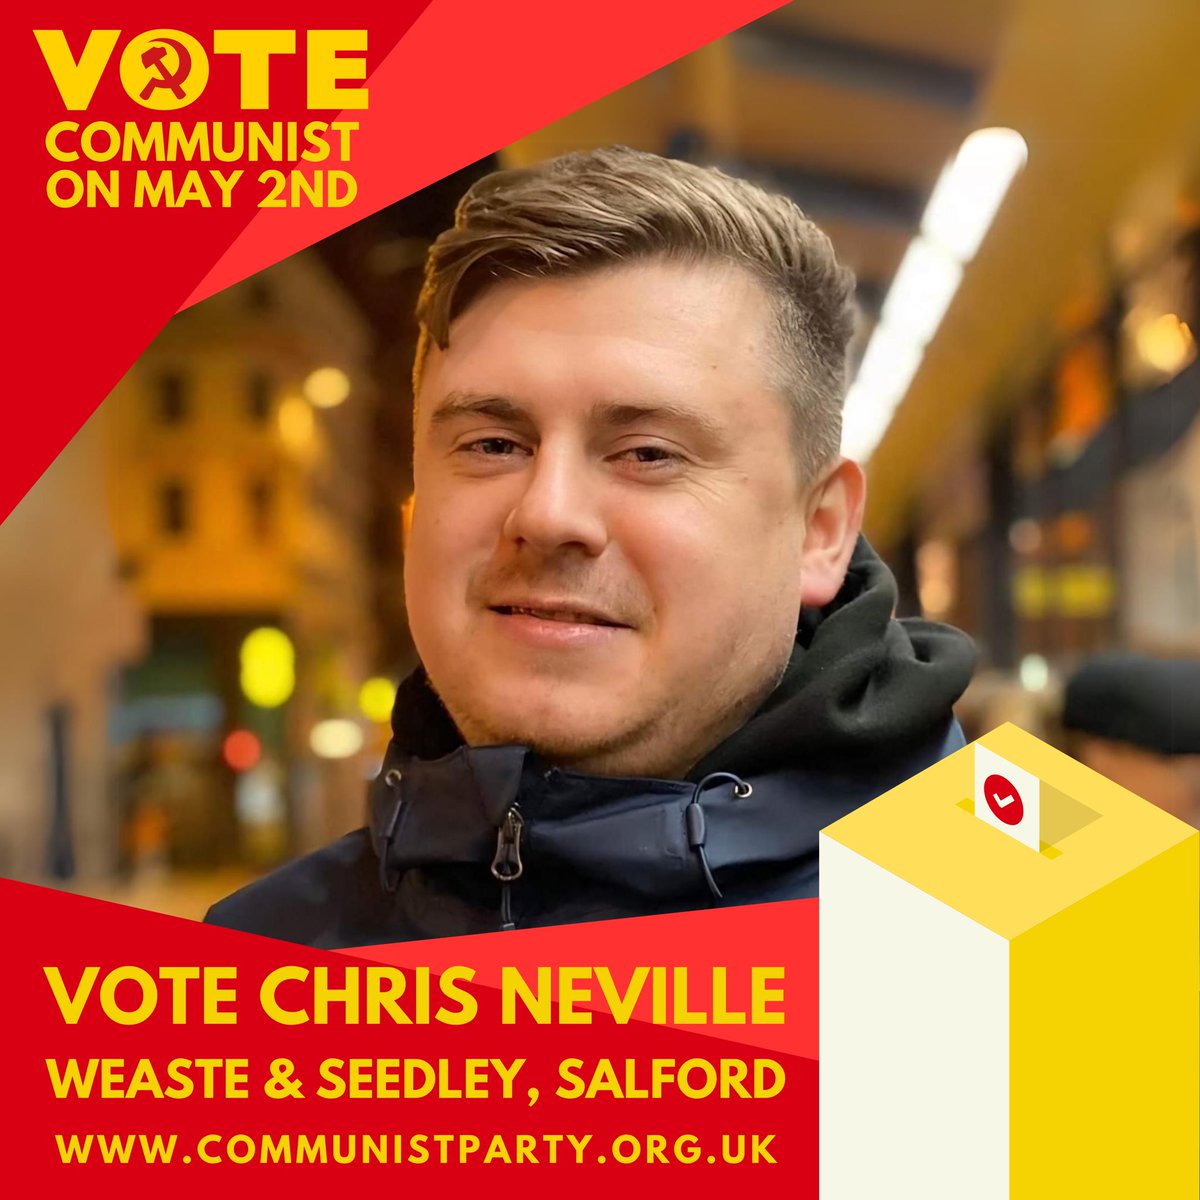 Vote, Campaign, Join: for the working class! #VoteCommunist on May 2nd 🗳️🚩 “I'm standing in Salford to give voters a choice. Not between Labour and Tory, but for something that will send a clear message to all the politicians” says Chris Neville @ChrisNev1985, 39, office…